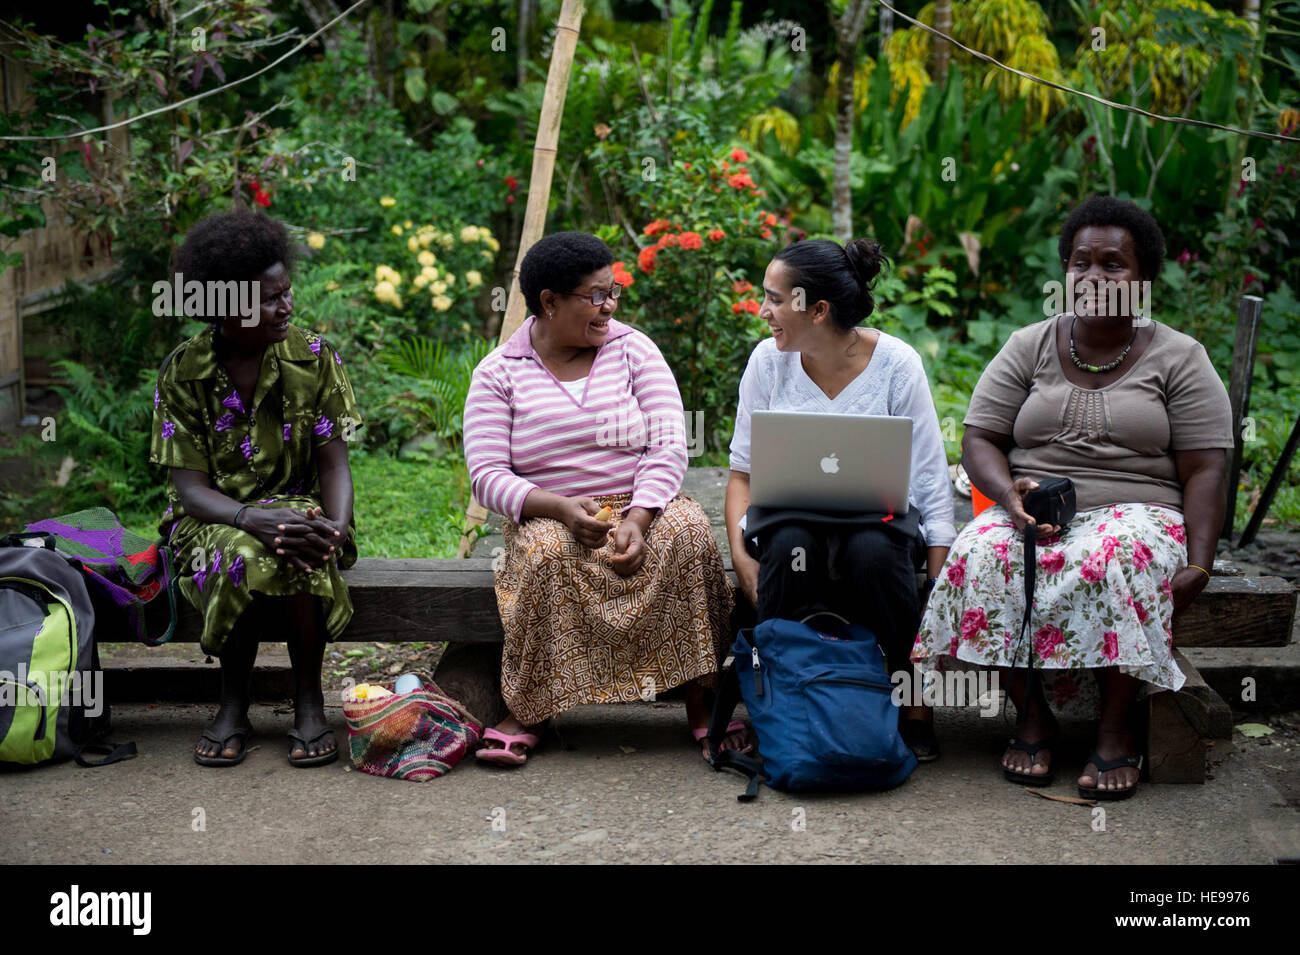 ARAWA, Autonomous Region of Bougainville, Papua New Guinea (July 2, 2015) (Second from right) Abhilasha Sharma, a gender specialist with Counterpart International, talks with Bougainville community leaders during a family violence prevention workshop at the Tuniva Learning Center as part of Pacific Partnership 2015. Leaders from Bougainville and the hospital ship USNS Mercy (T-AH 19) conducted the workshop as part of the National Action Plan on Women, Peace and Security. Mercy is currently in Papua New Guinea for its second mission port of PP15. Pacific Partnership is in its 10th iteration and Stock Photo